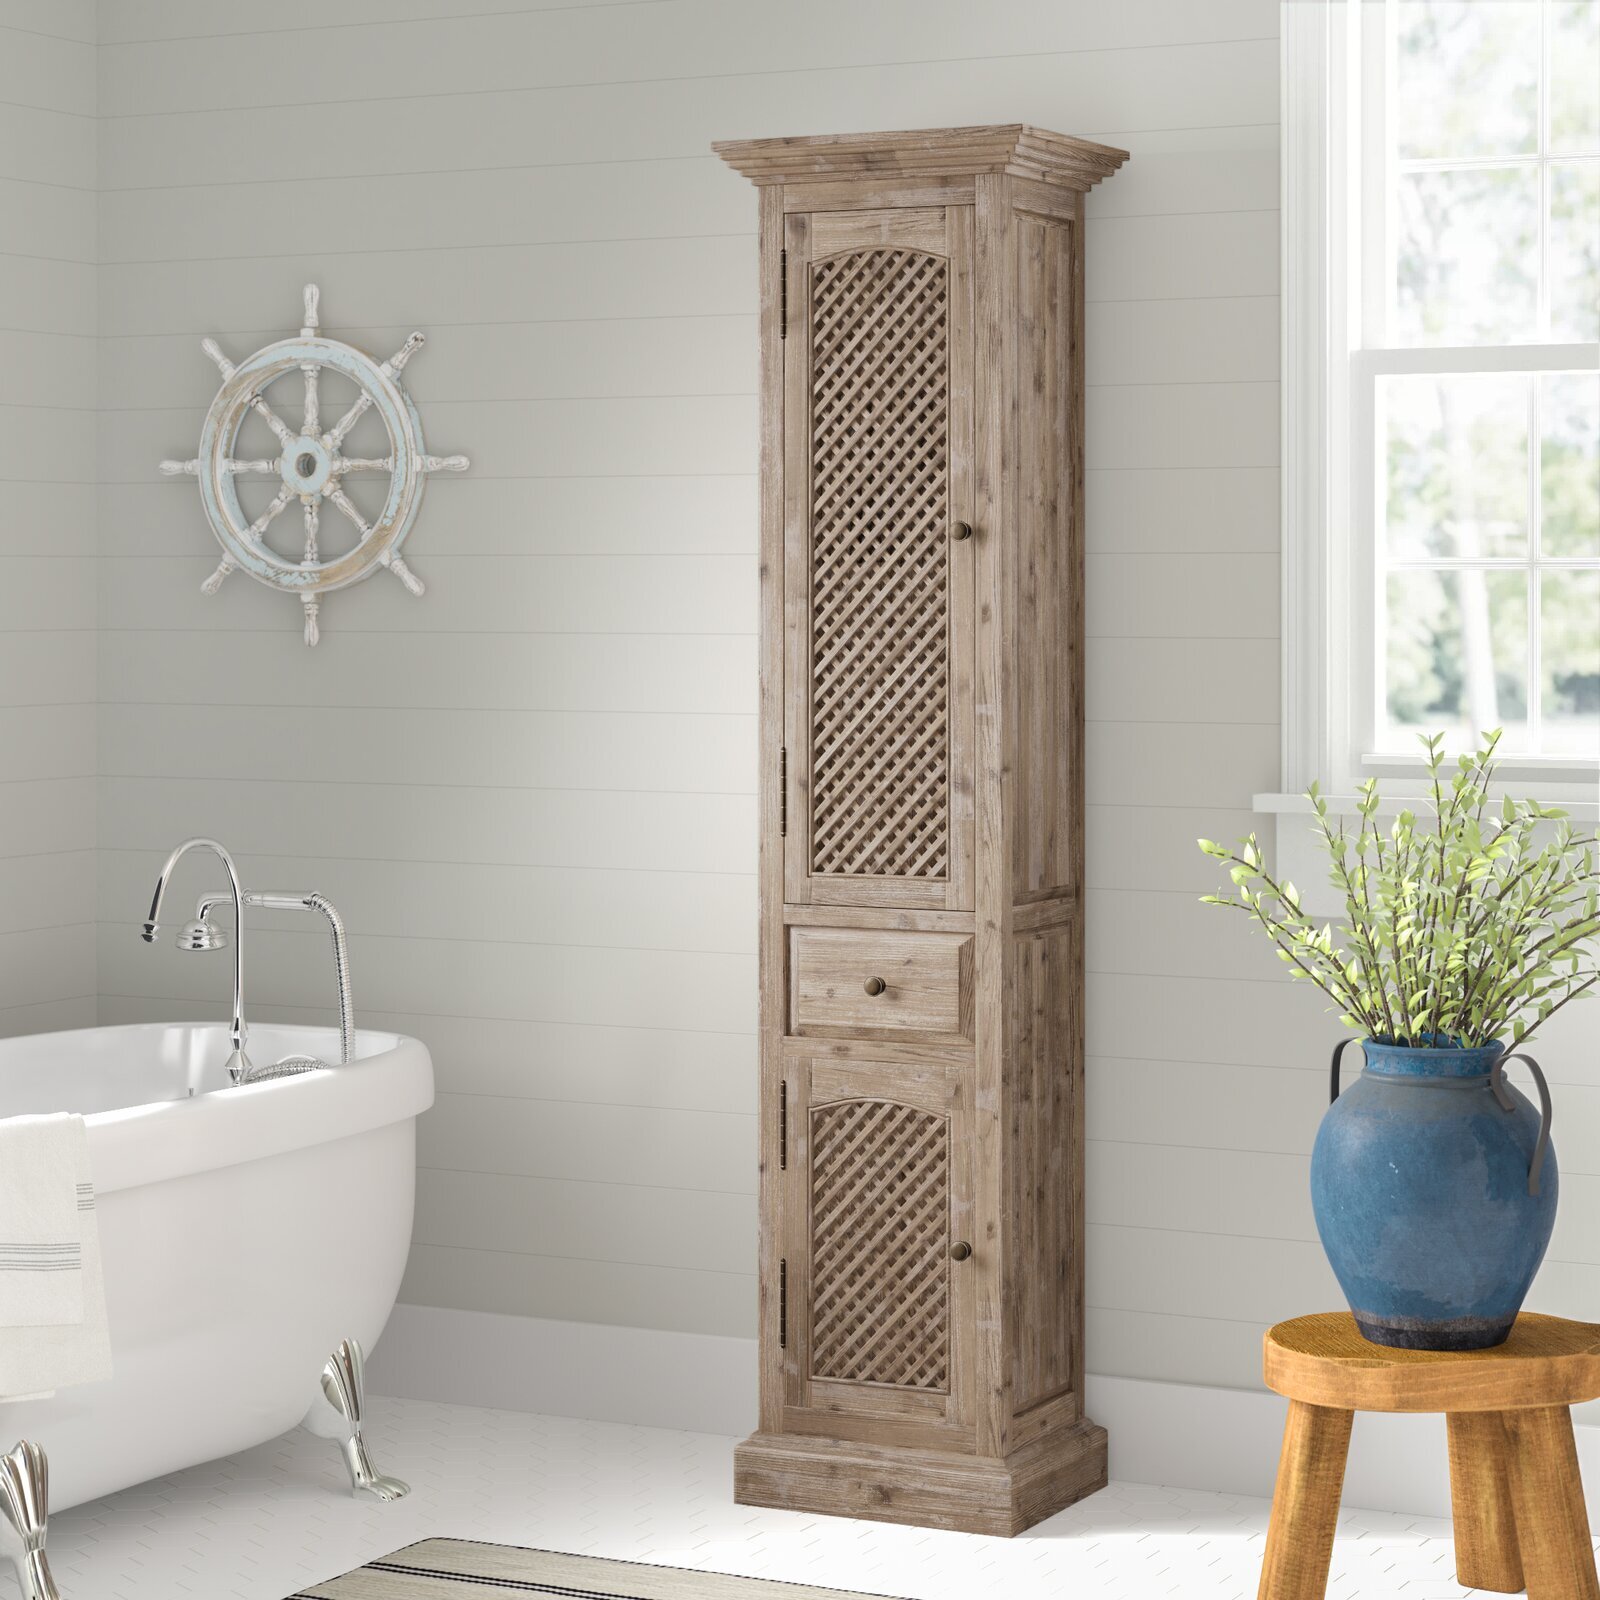 A rustic tower cabinet with lattice doors